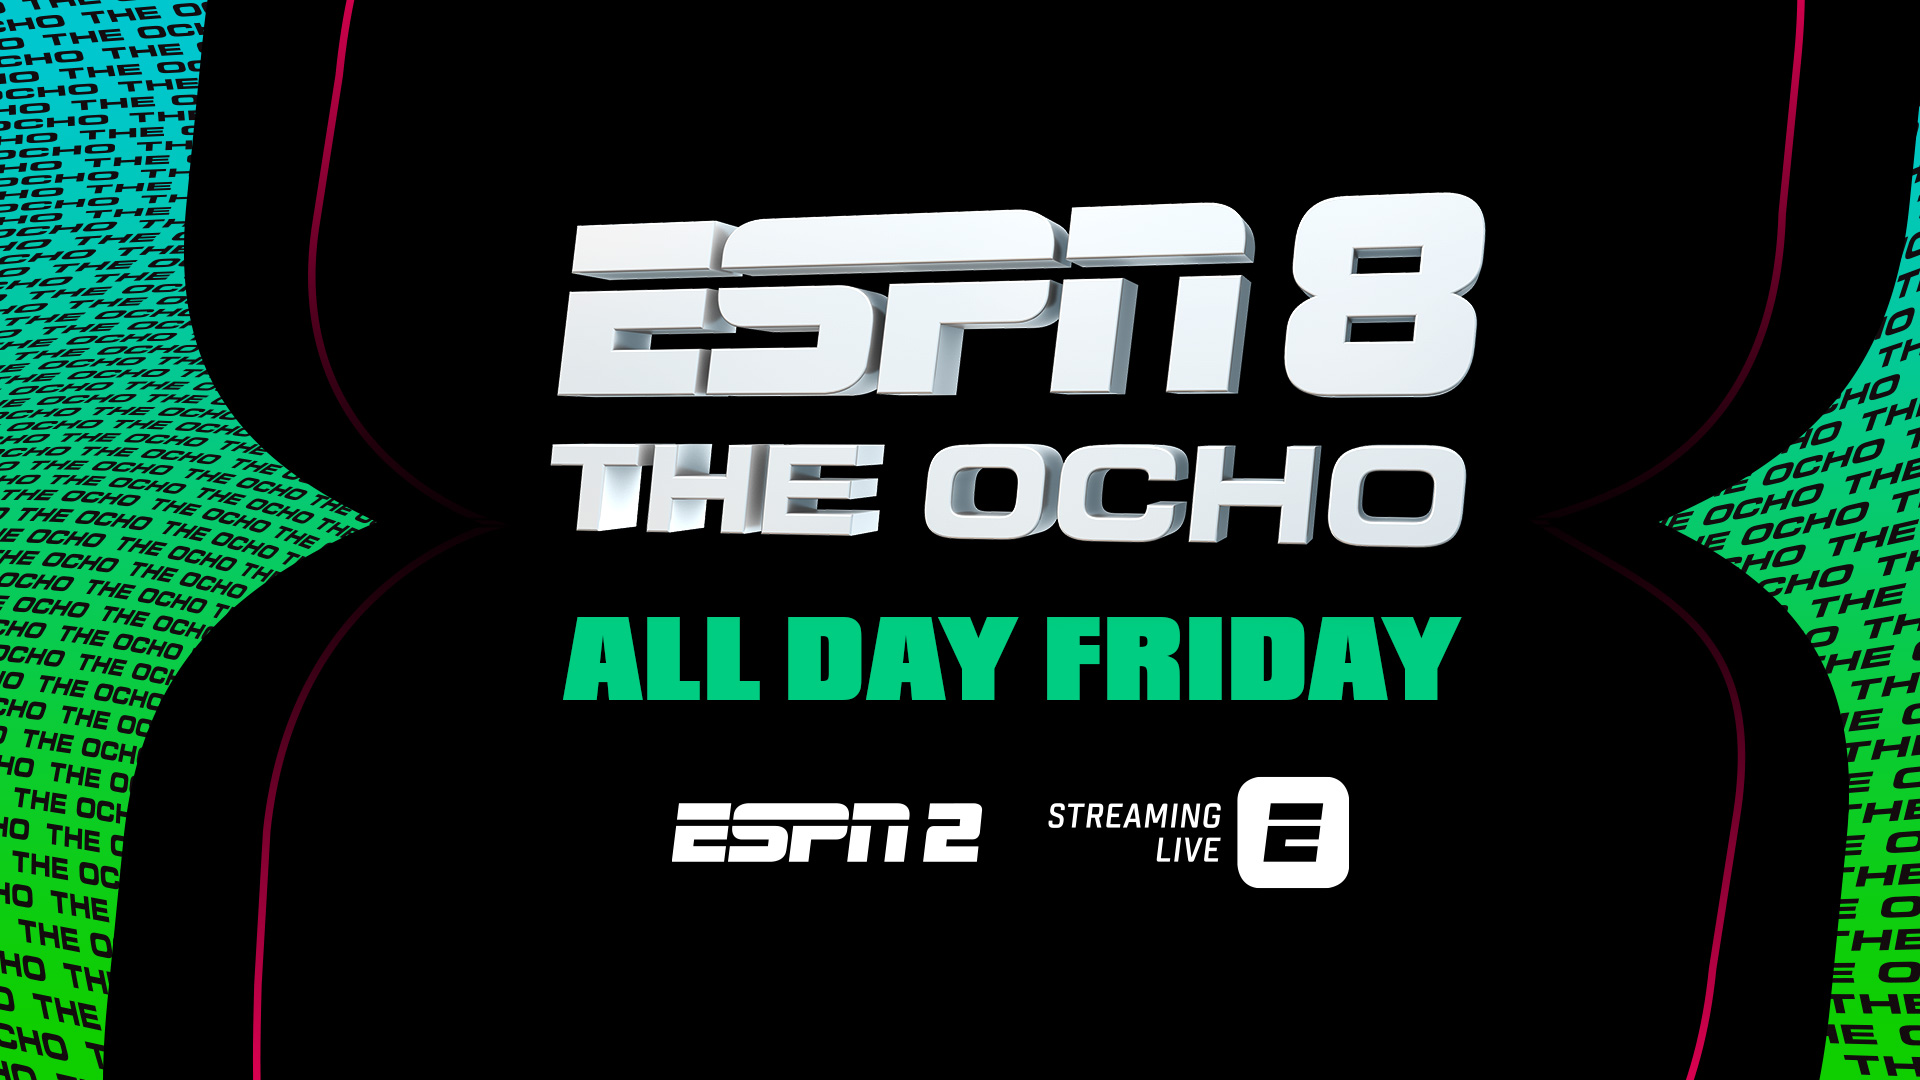 The Countdown: Broadcast Live at 5:30 Tonight on ESPN+